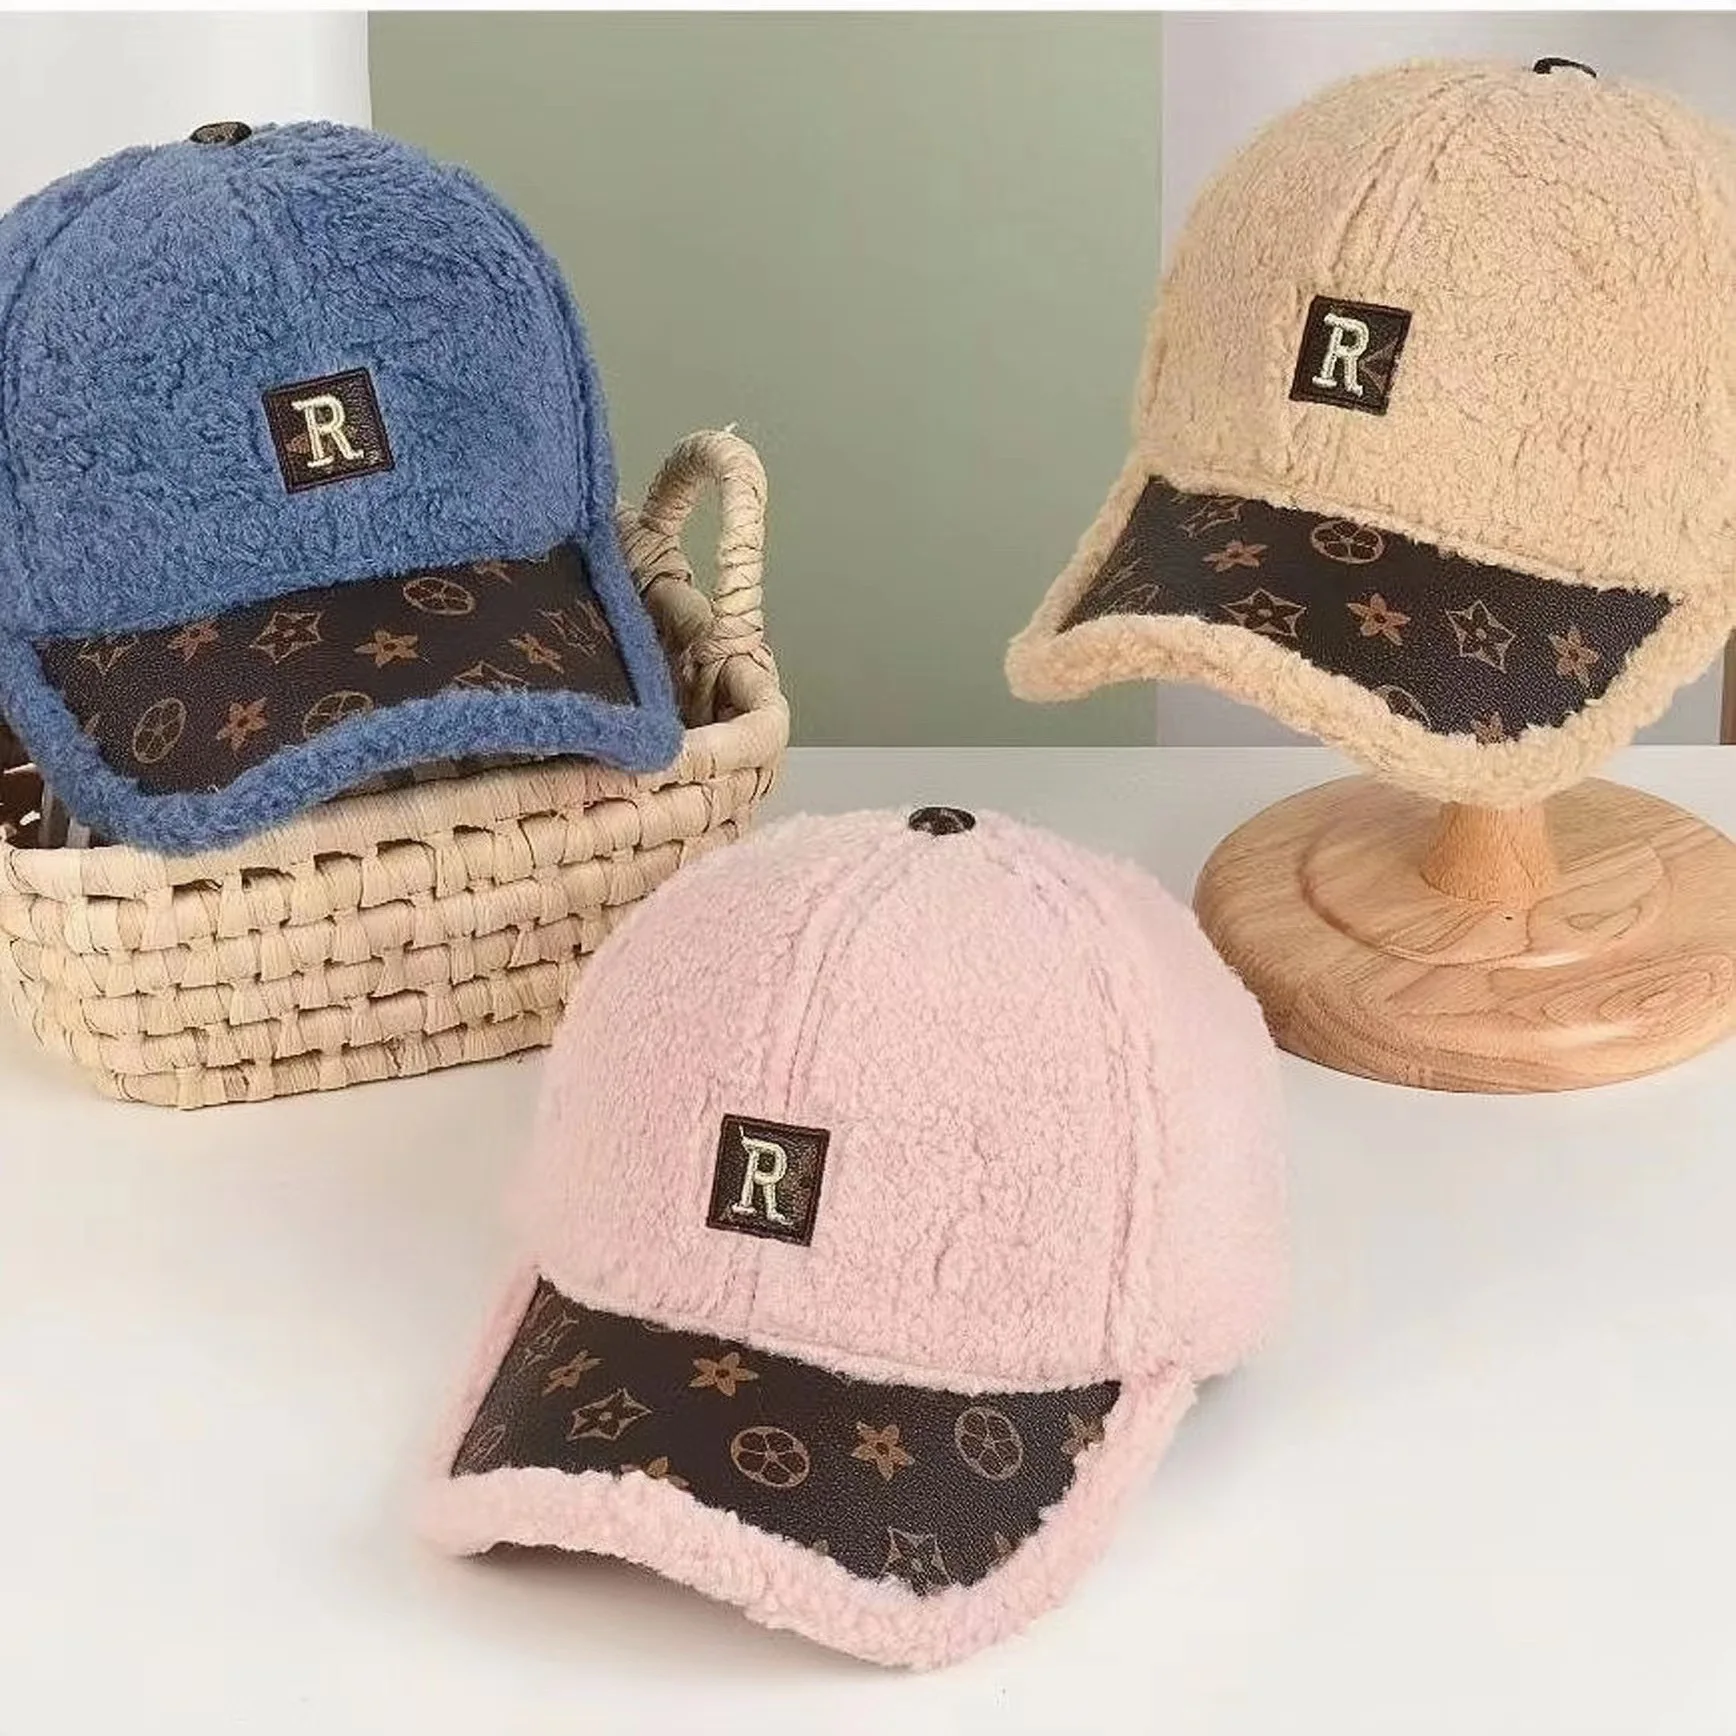 New lamb wool baseball cap embroidered old flower fashion cap, outdoor male and female couple hat